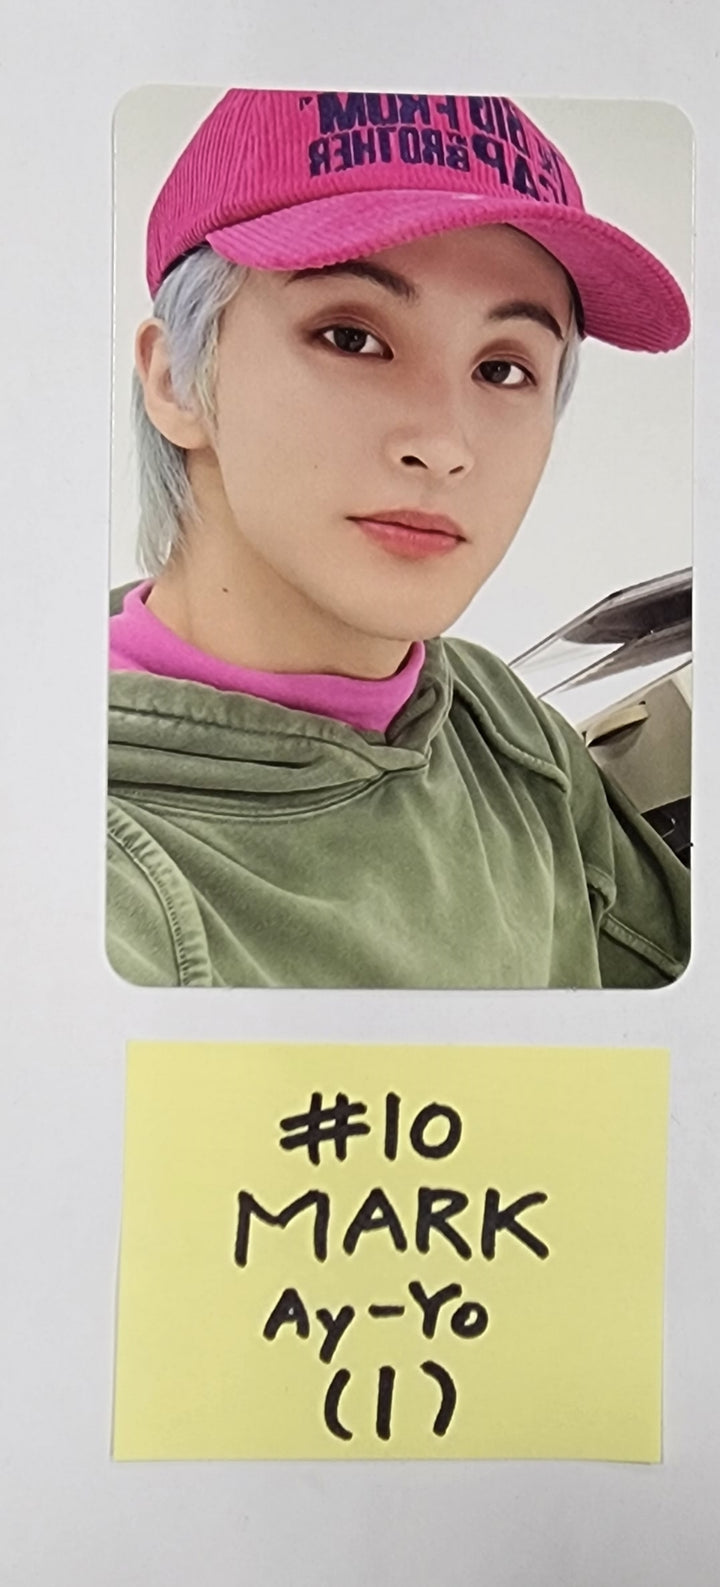 NCT127 "AY-YO" - Smtown Official Trading Photocard (B ver) [Updated 4/18]